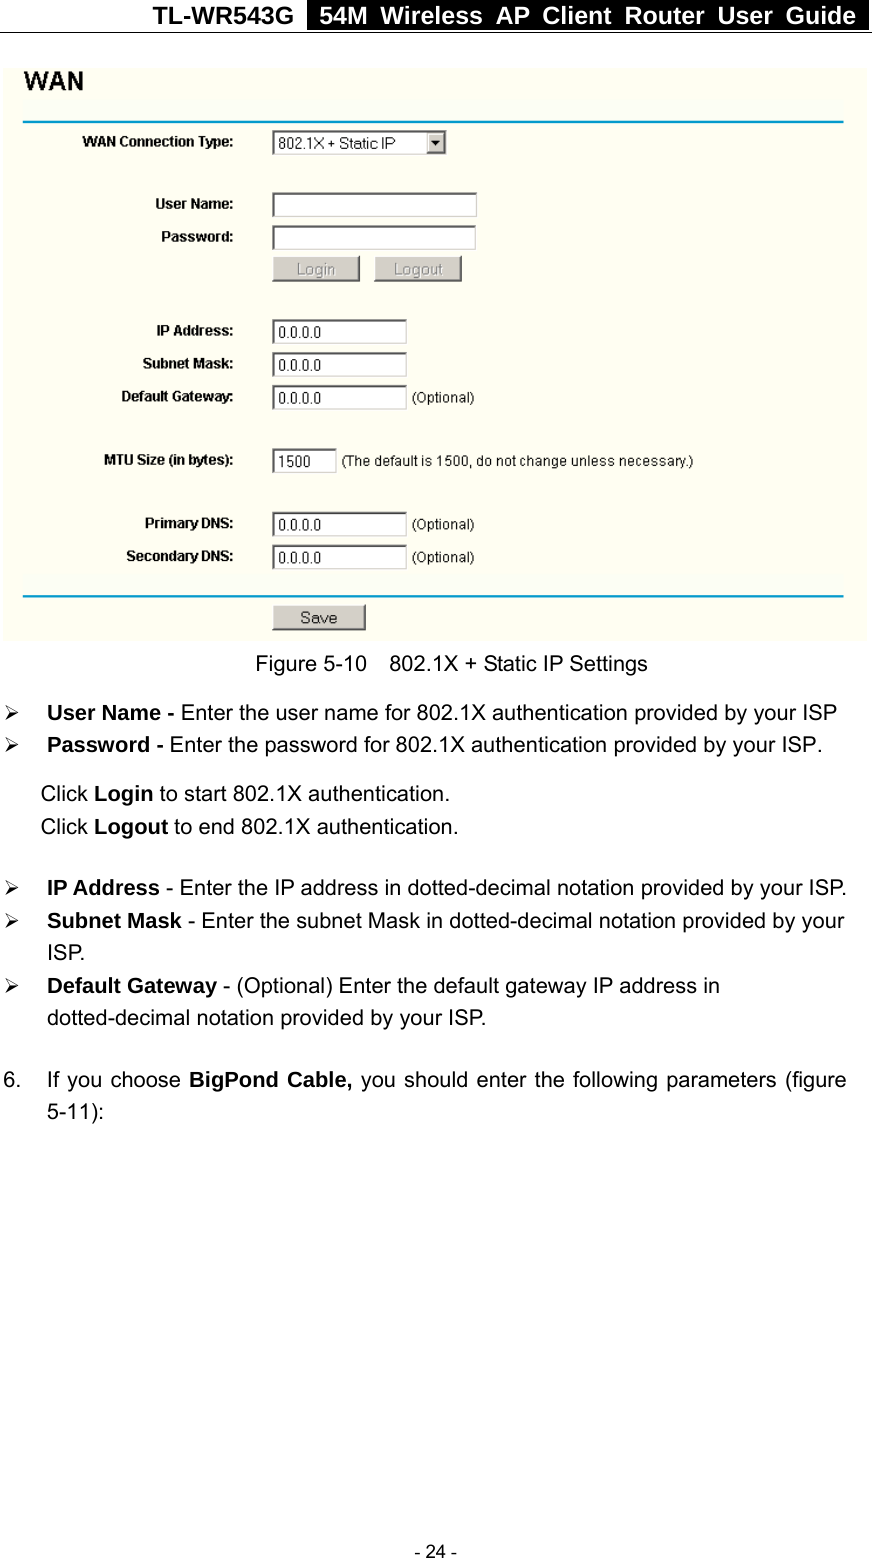 TL-WR543G   54M Wireless AP Client Router User Guide   Figure 5-10    802.1X + Static IP Settings ¾ User Name - Enter the user name for 802.1X authentication provided by your ISP ¾ Password - Enter the password for 802.1X authentication provided by your ISP. Click Login to start 802.1X authentication. Click Logout to end 802.1X authentication. ¾ IP Address - Enter the IP address in dotted-decimal notation provided by your ISP. ¾ Subnet Mask - Enter the subnet Mask in dotted-decimal notation provided by your ISP. ¾ Default Gateway - (Optional) Enter the default gateway IP address in dotted-decimal notation provided by your ISP. 6.  If you choose BigPond Cable, you should enter the following parameters (figure 5-11):   - 24 - 